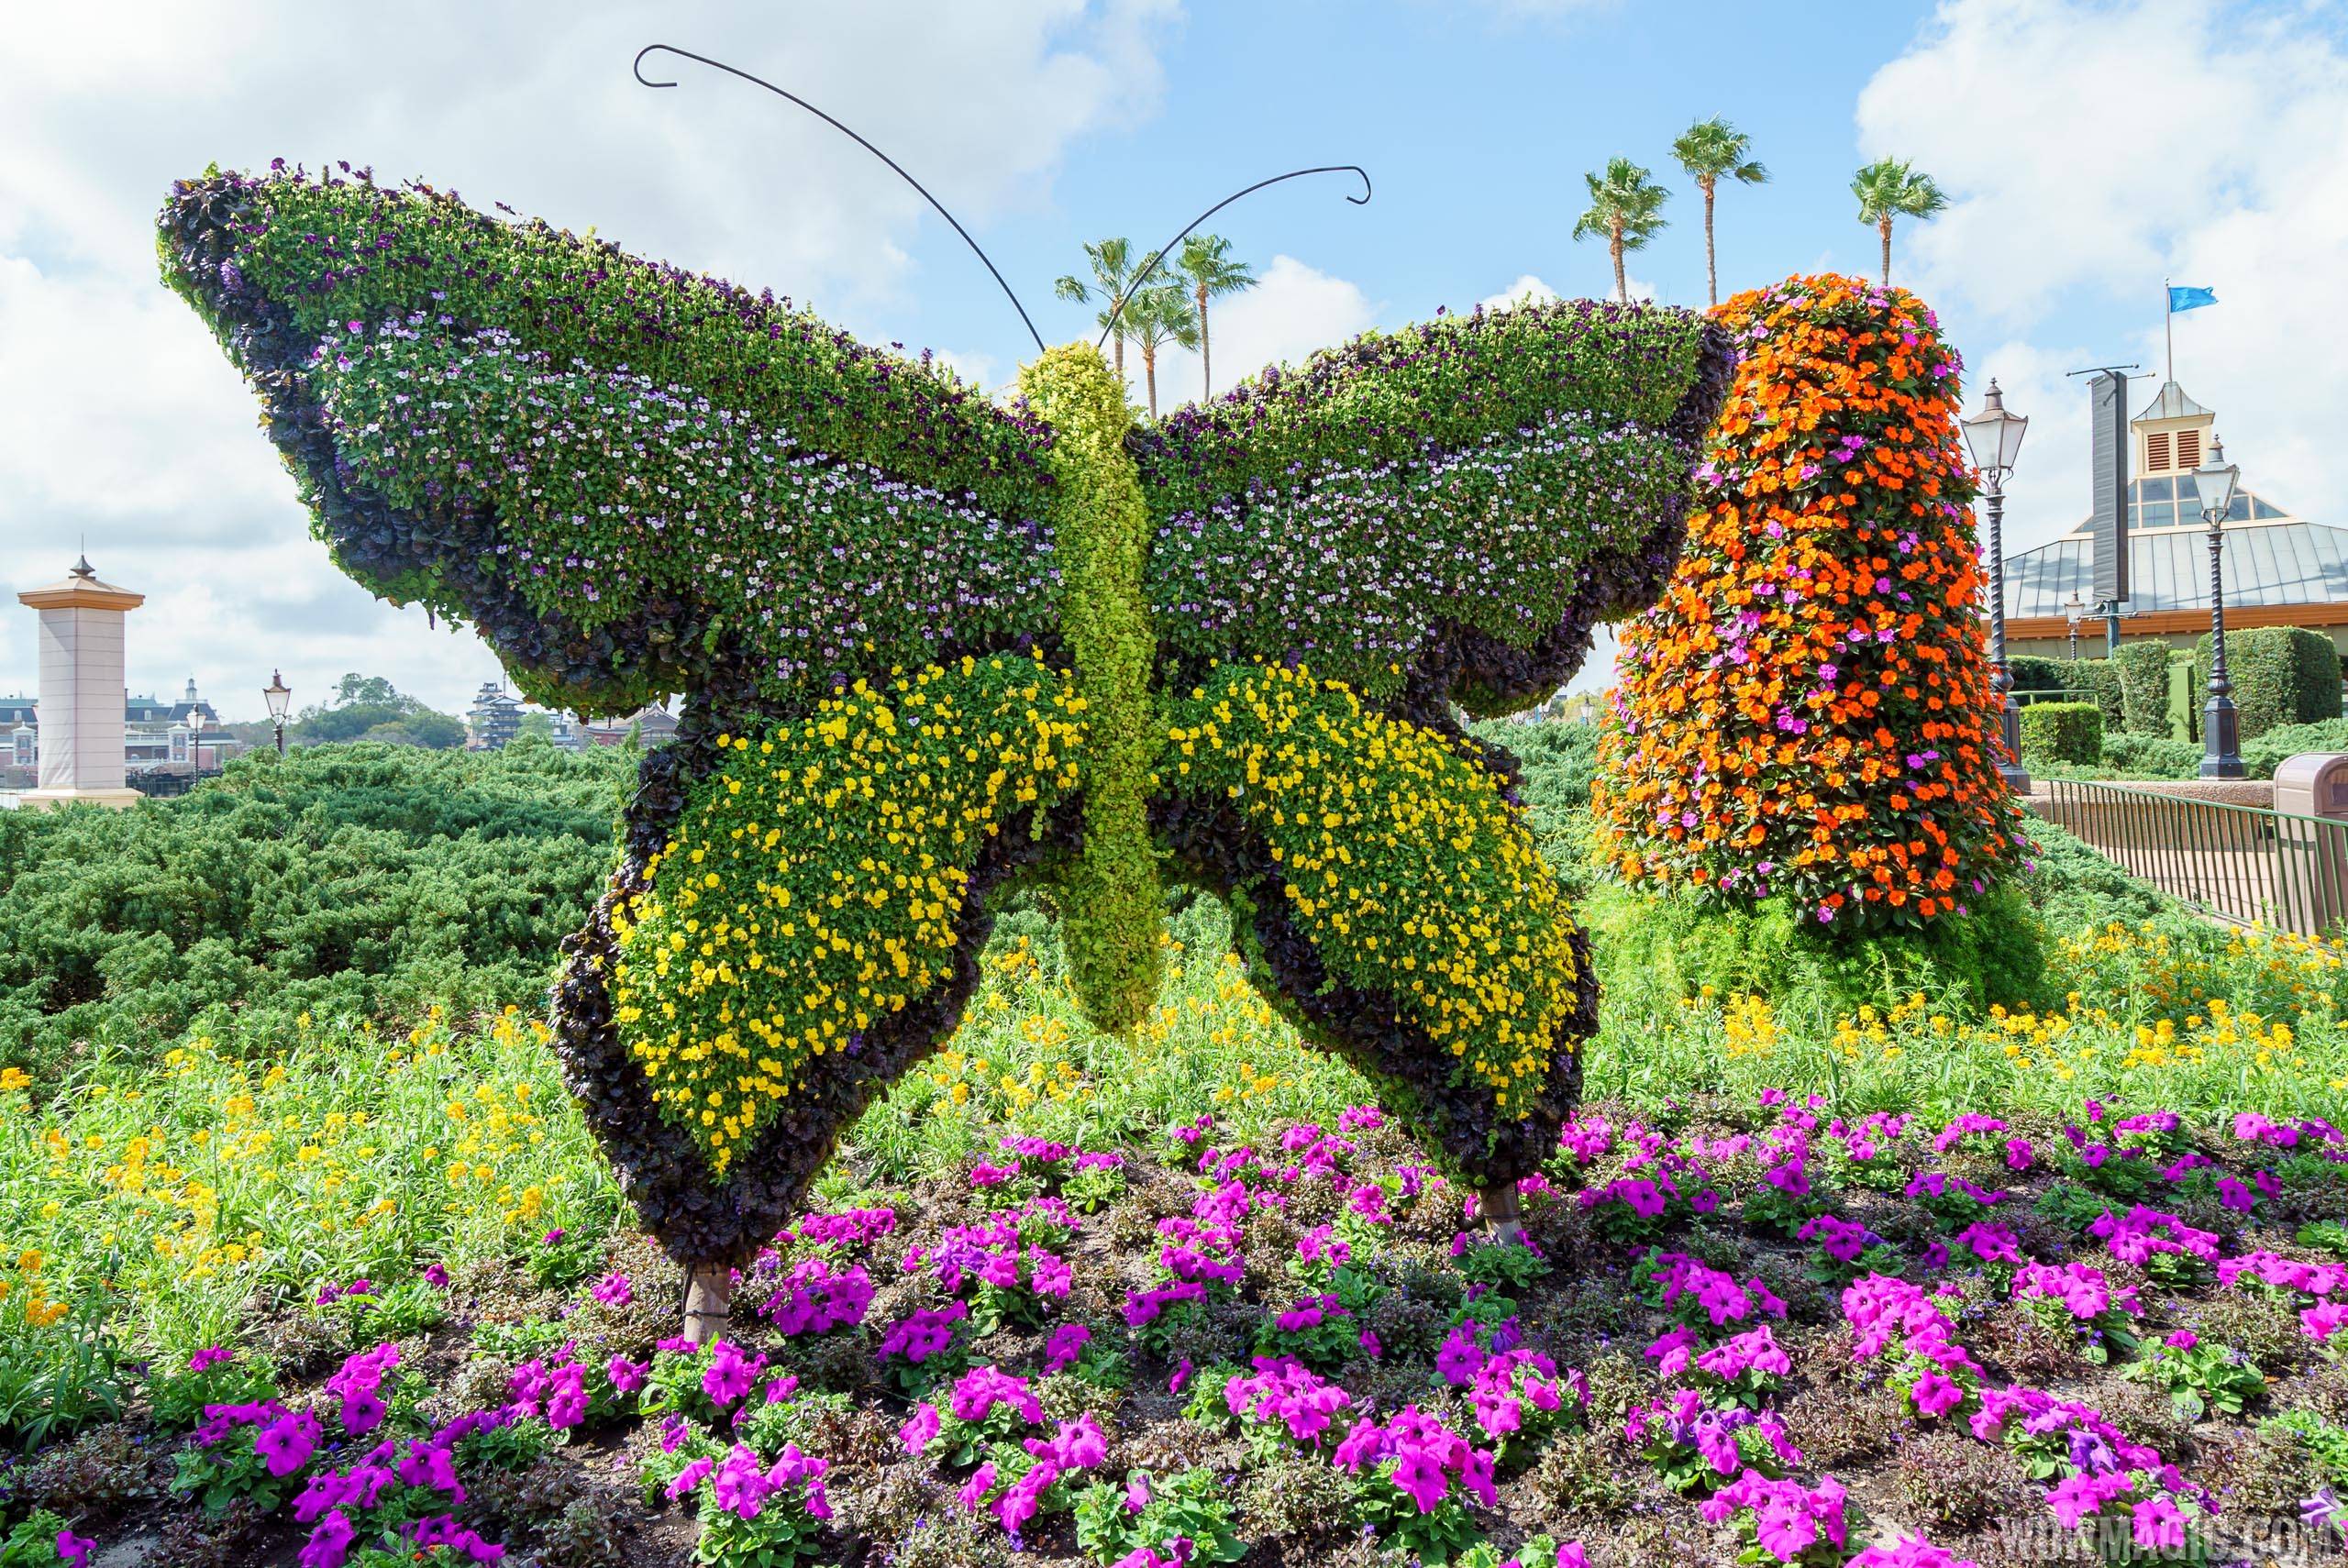 2017 Flower and Garden Festival - Butterfly topiary in Showcase Plaza